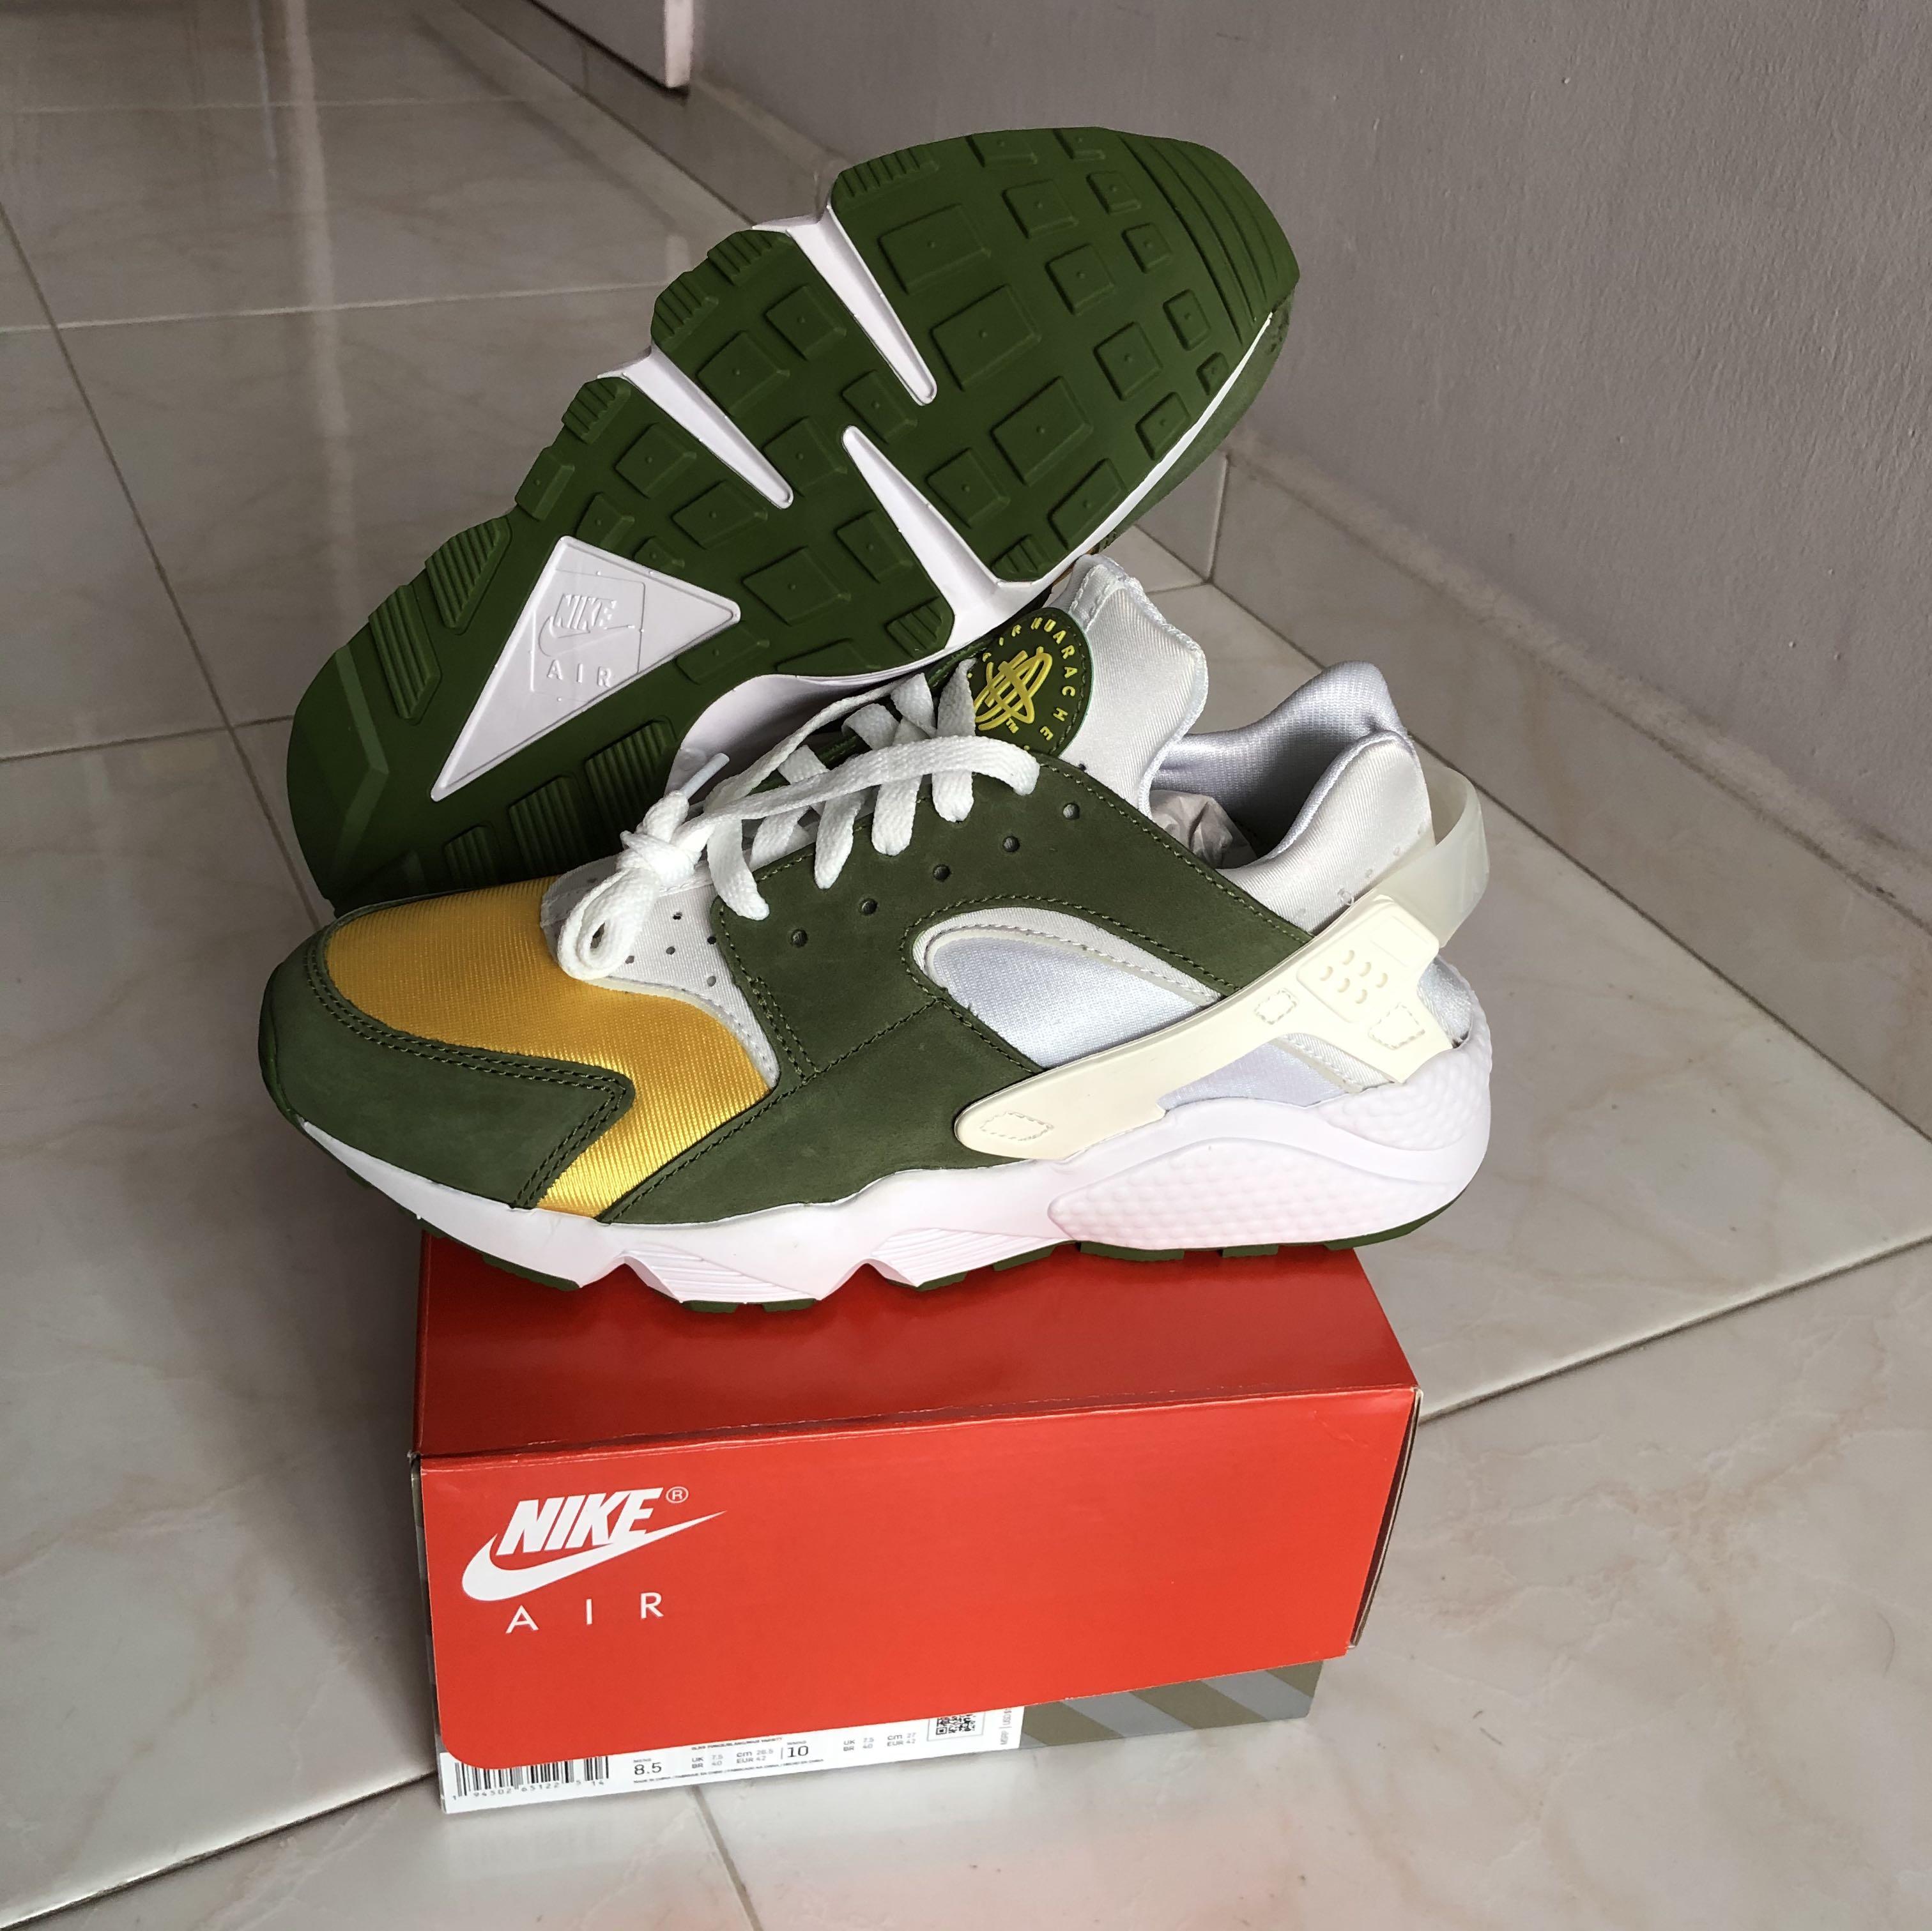 Us7 5 Nike Air Huarache Stussy Dark Olive 21 Lower Than Retail Price Men S Fashion Footwear Sneakers On Carousell